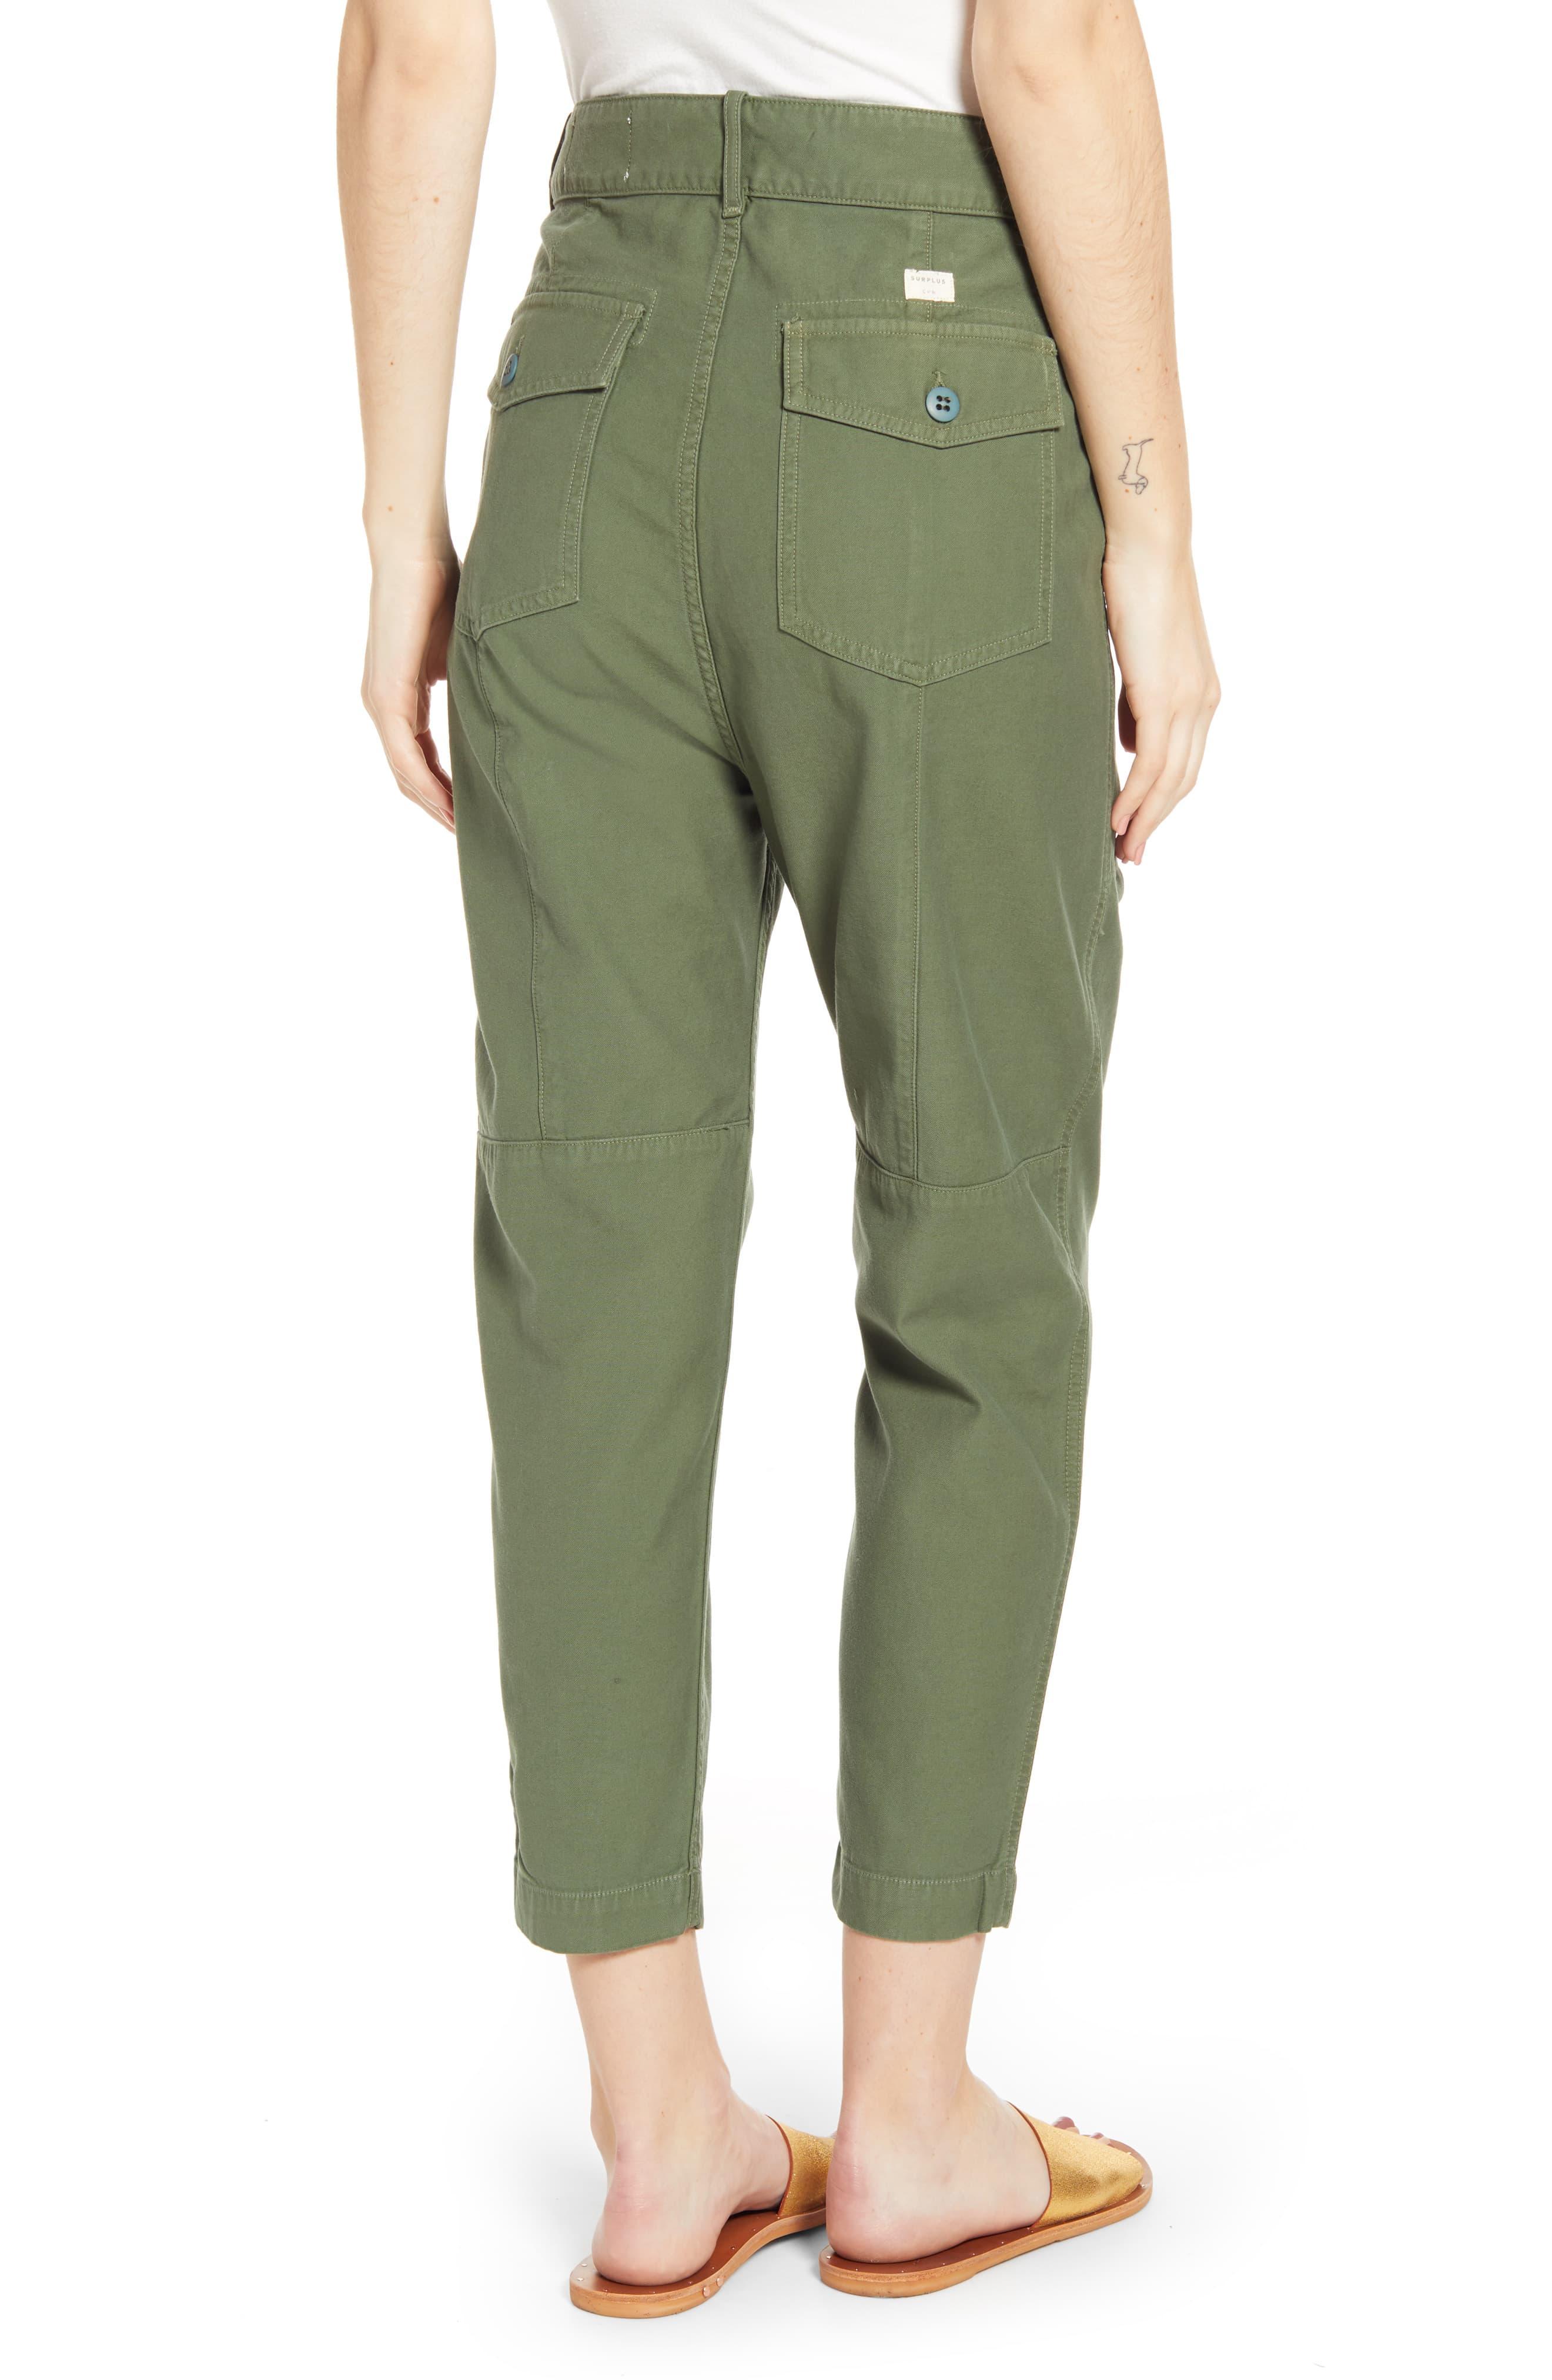 Citizens of Humanity Cotton Twill Taper Crop Pants in Green - Lyst